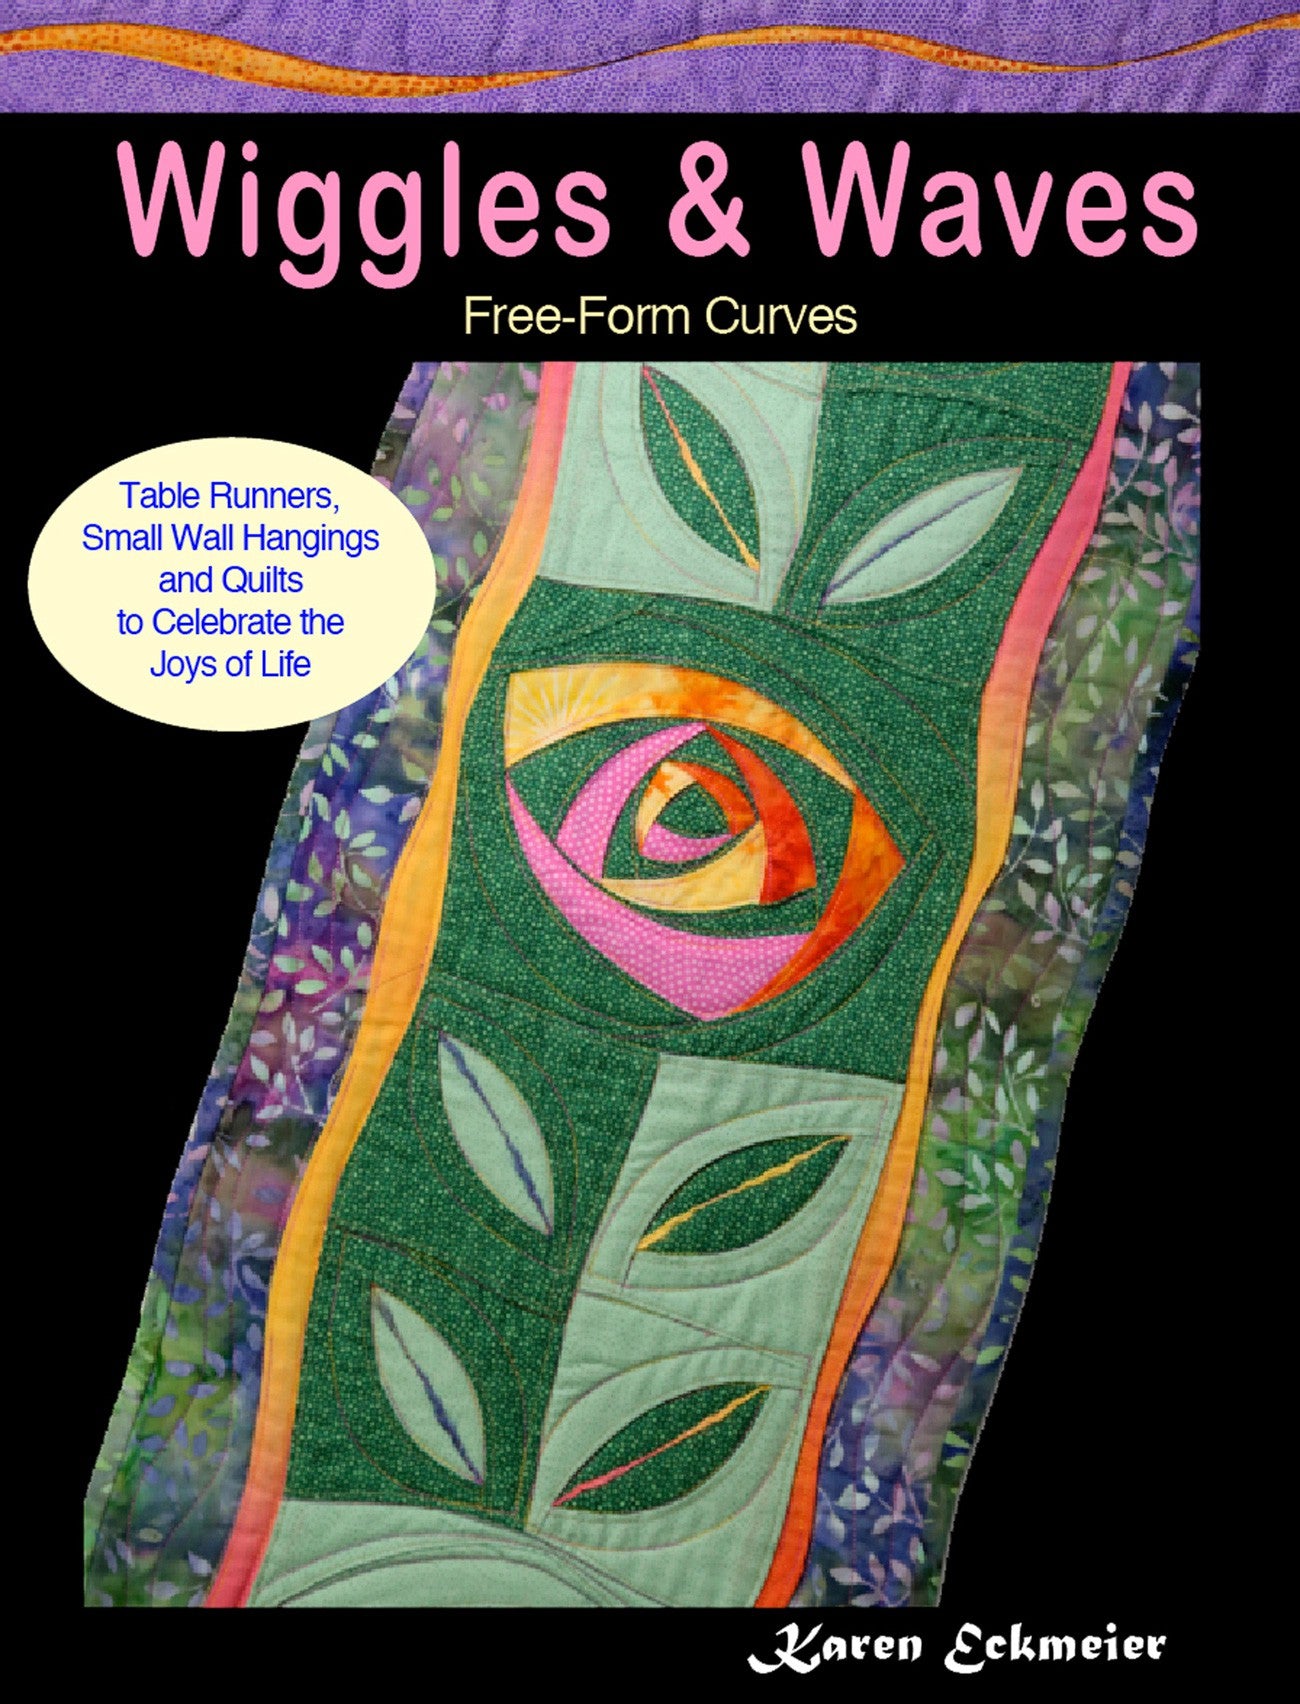 Wiggles and Waves Quilt Pattern Book by Karen Eckmeier of The Quilted Lizard